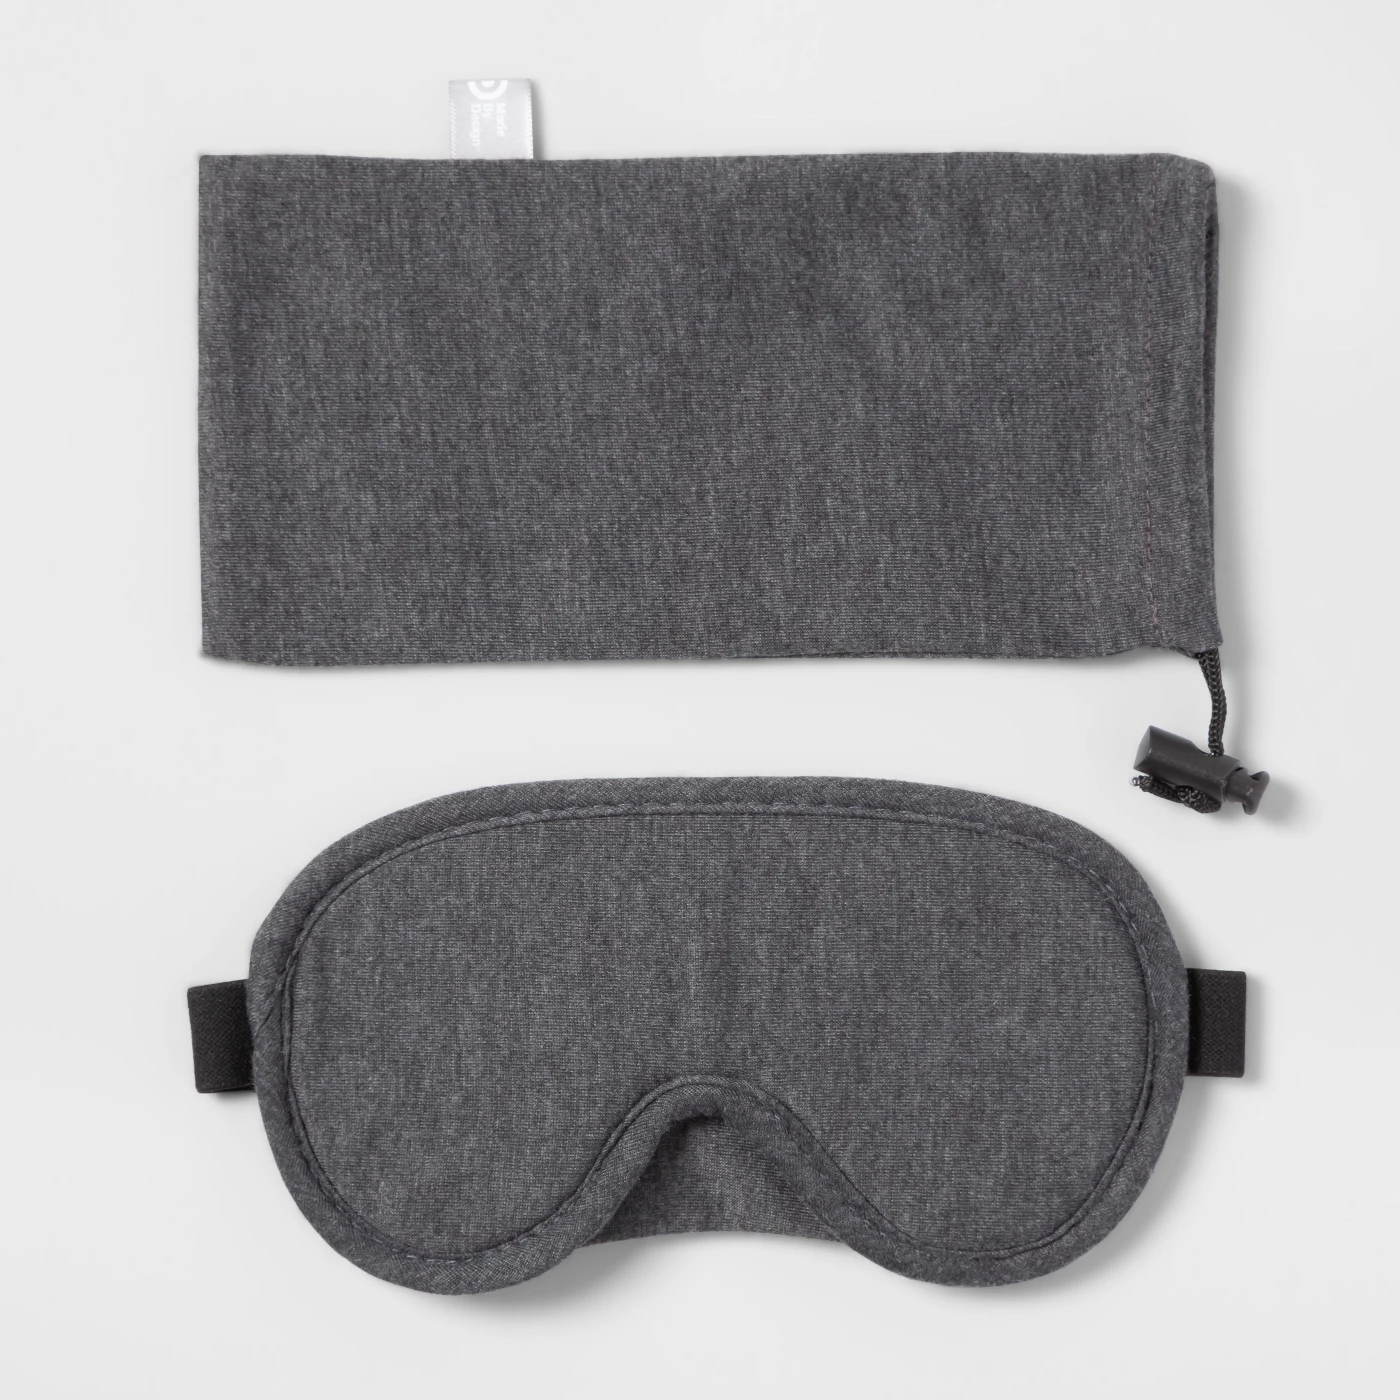 sleep mask for iceland packing list